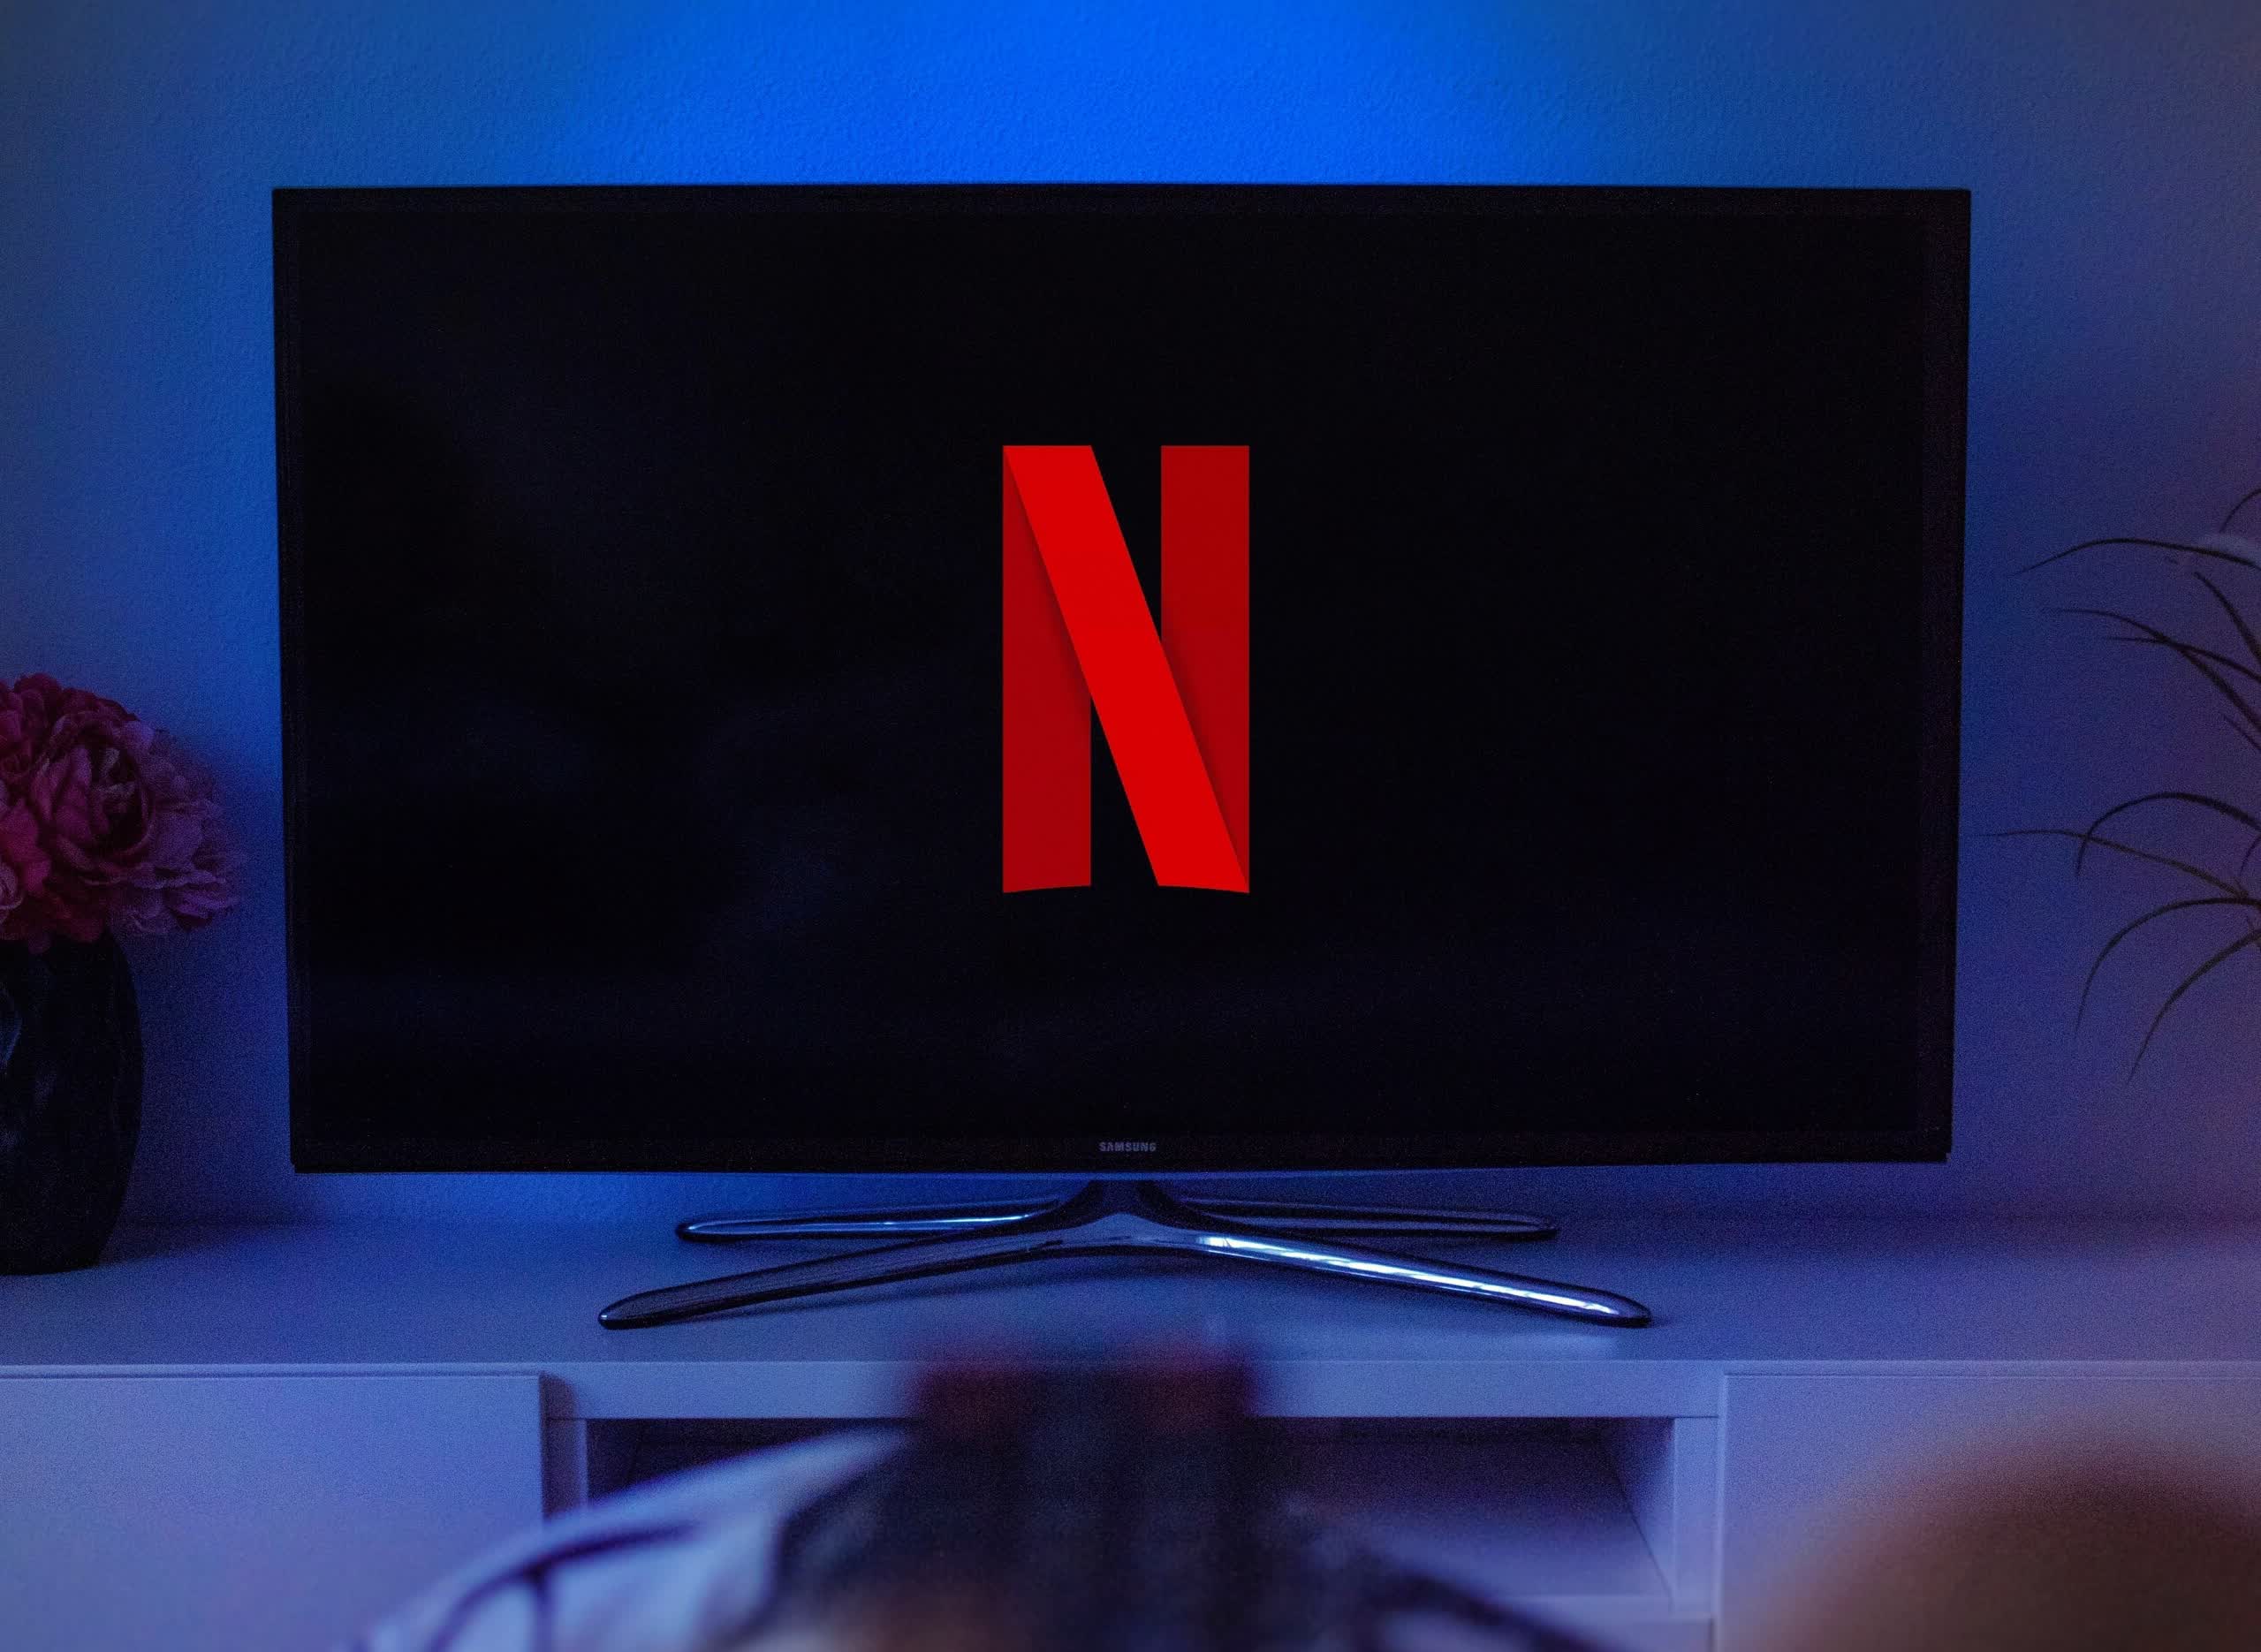 Netflix to block devices that don't log in monthly, more premium perks added